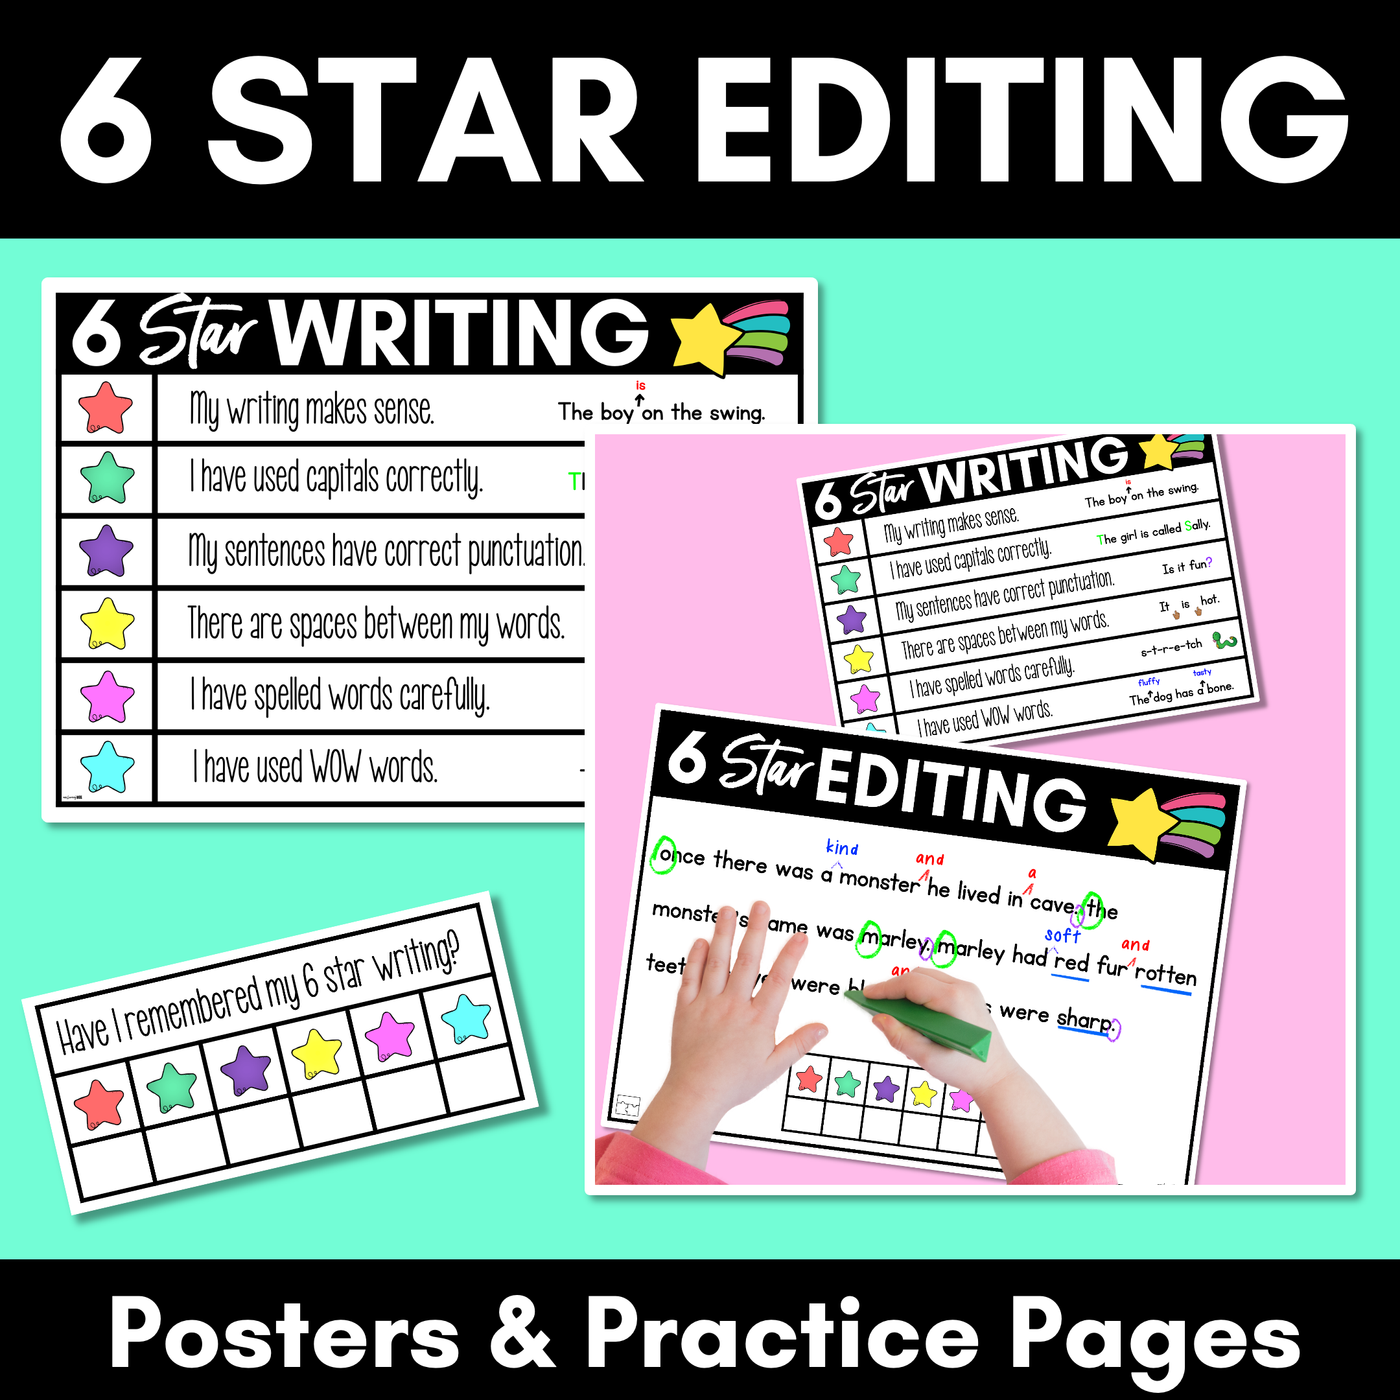 6 Star Editing Checklist | Posters & Practice Pages